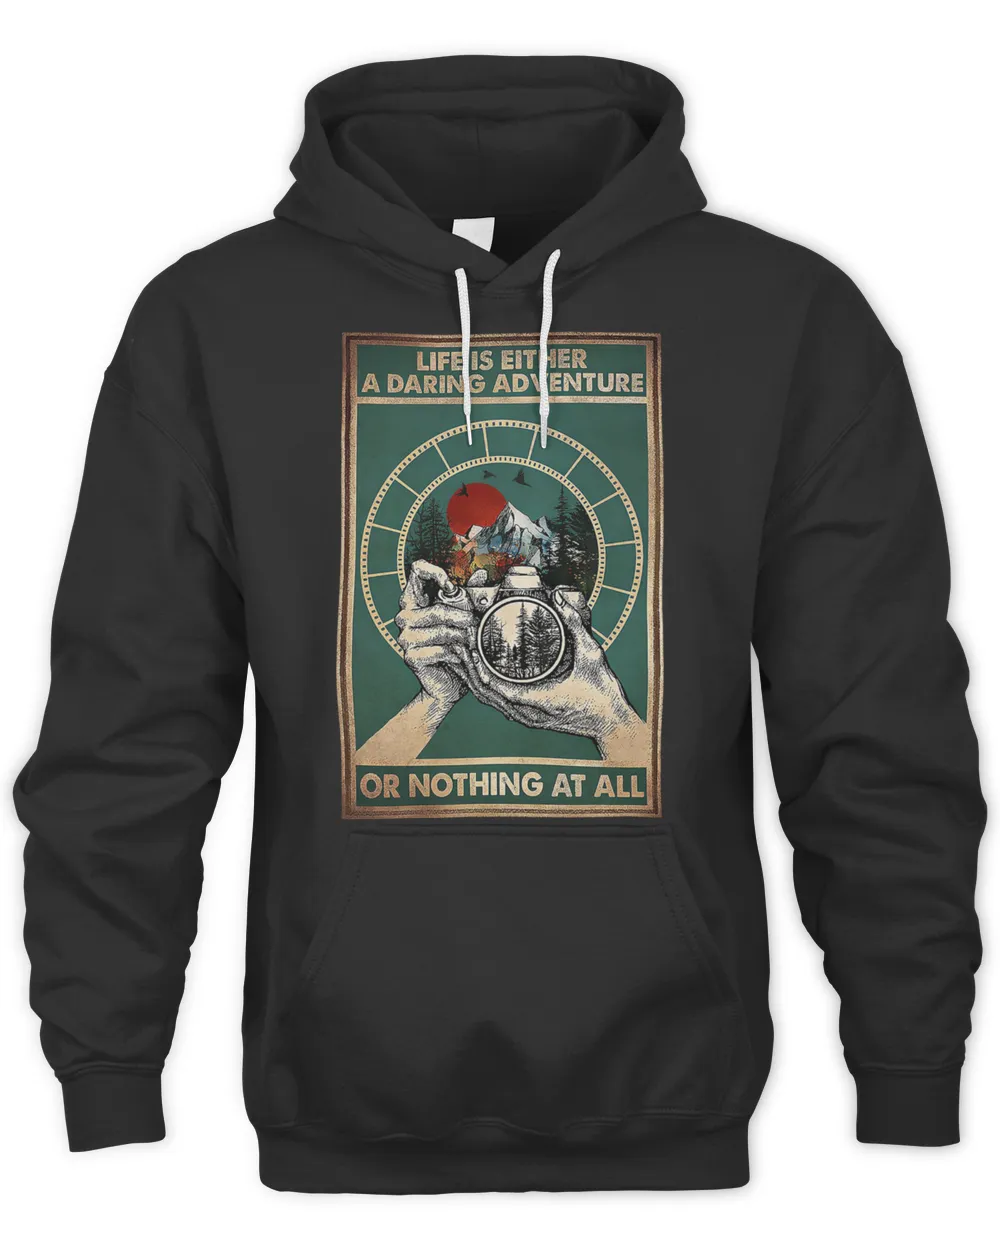 Life Is Daring Adventure or nothing at all Photographer T-Shirt